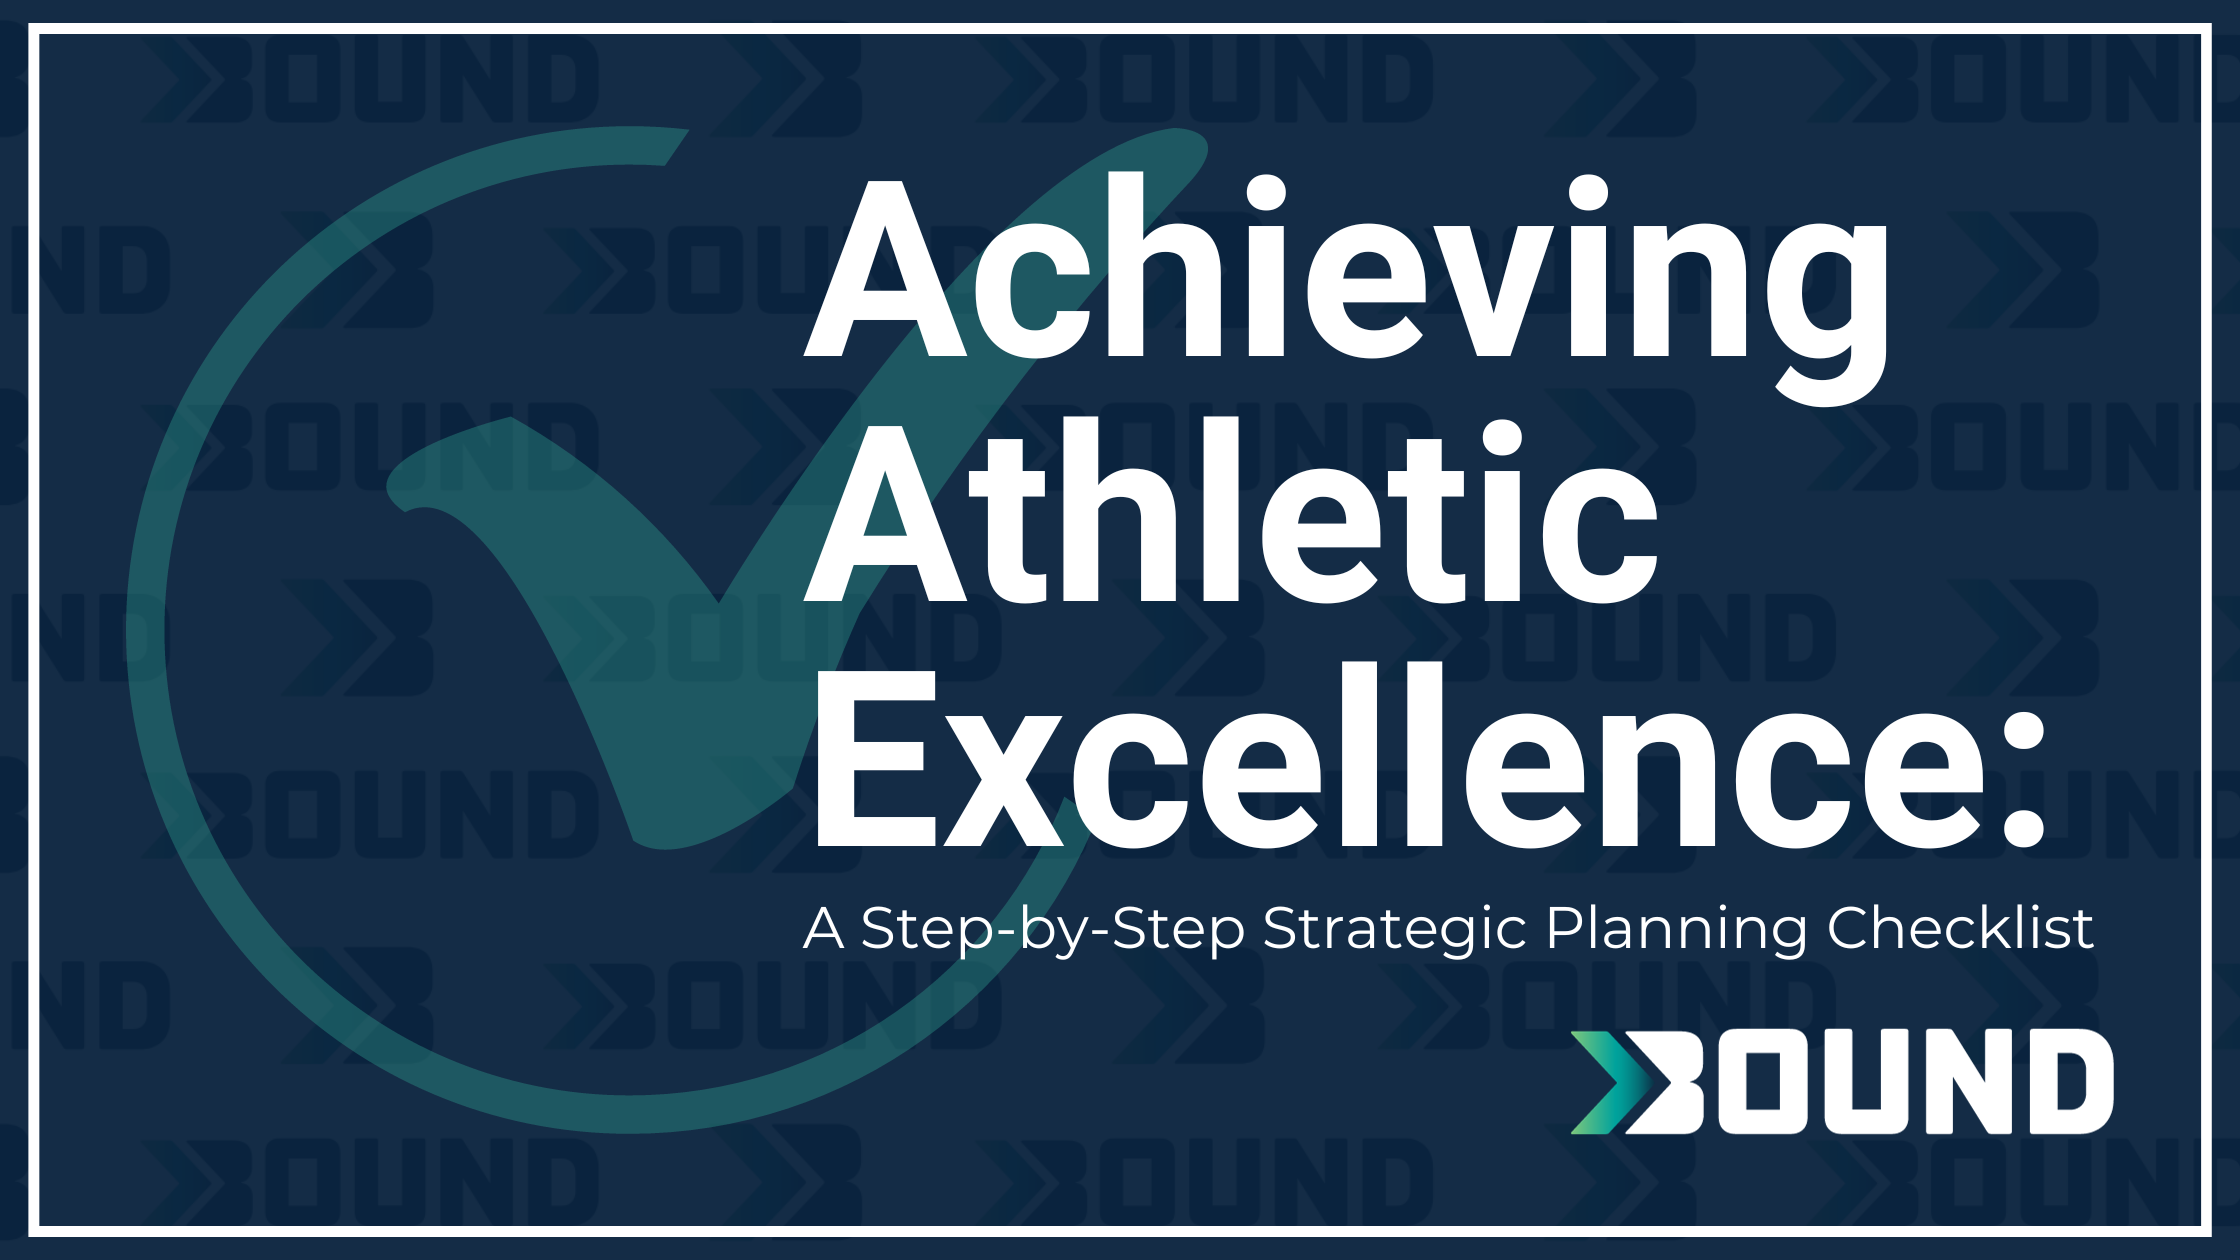 Achieving Athletic Excellence: A Step-by-Step Strategic Planning Checklist